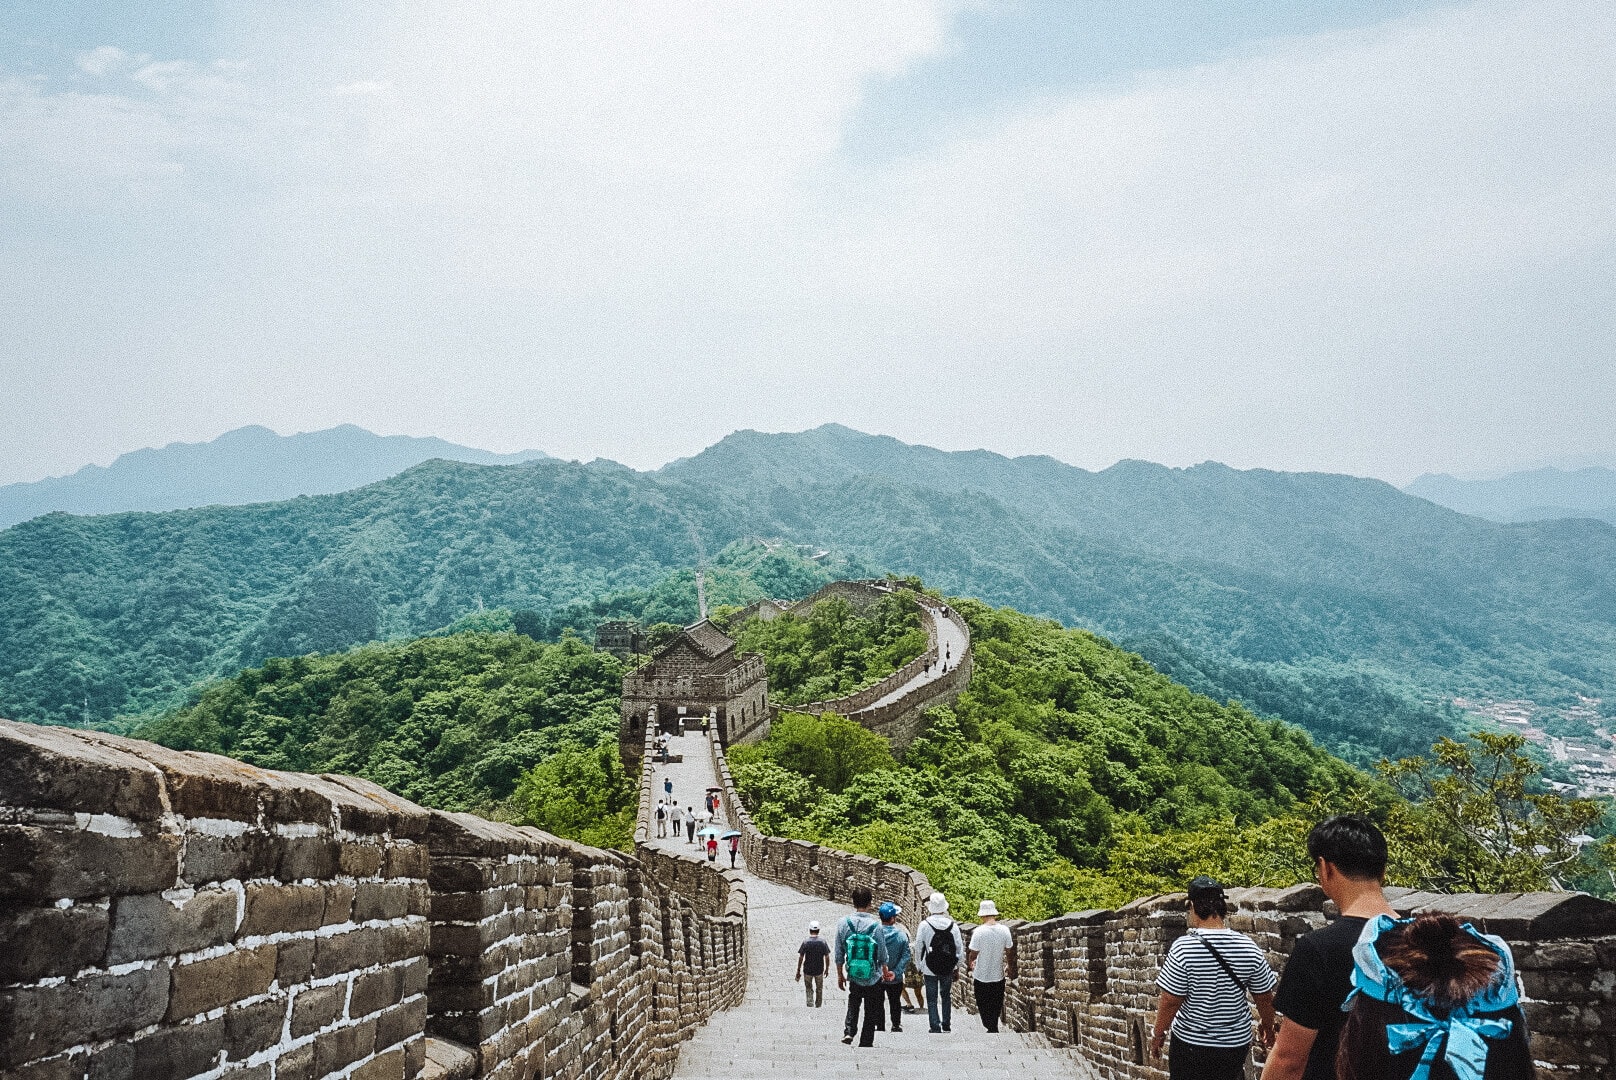 Travel bloggers reveal their most unforgettable travel experiences - The Great Wall of China